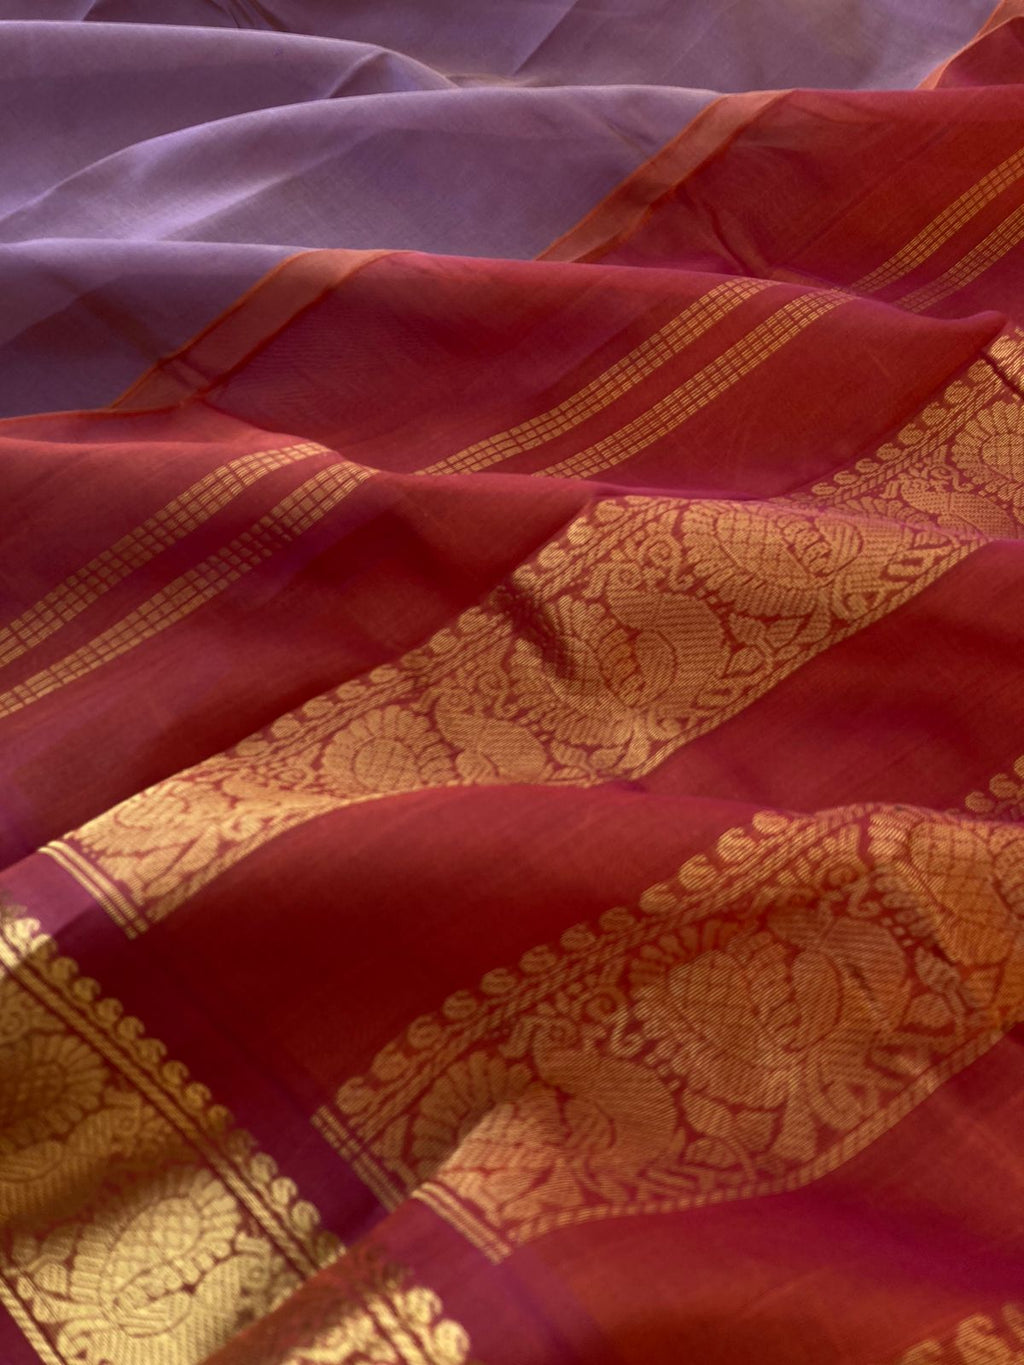 Korvai Silk Cottons - rust short lavender for people who love small borders